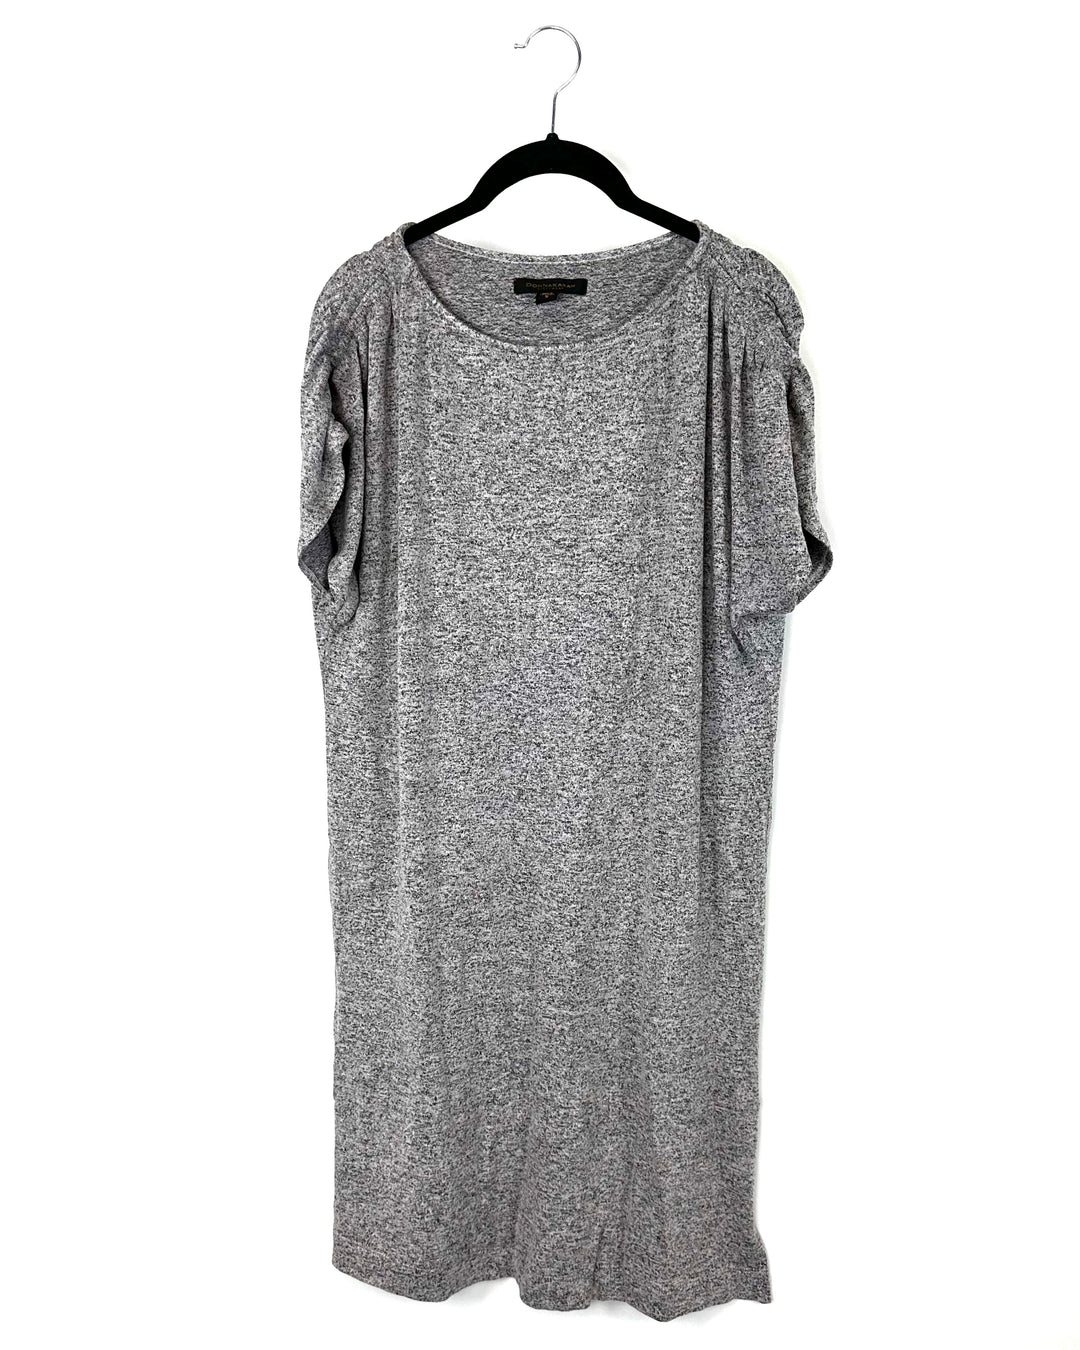 Heather Gray and Pink Lounge Dress - Size 6-8